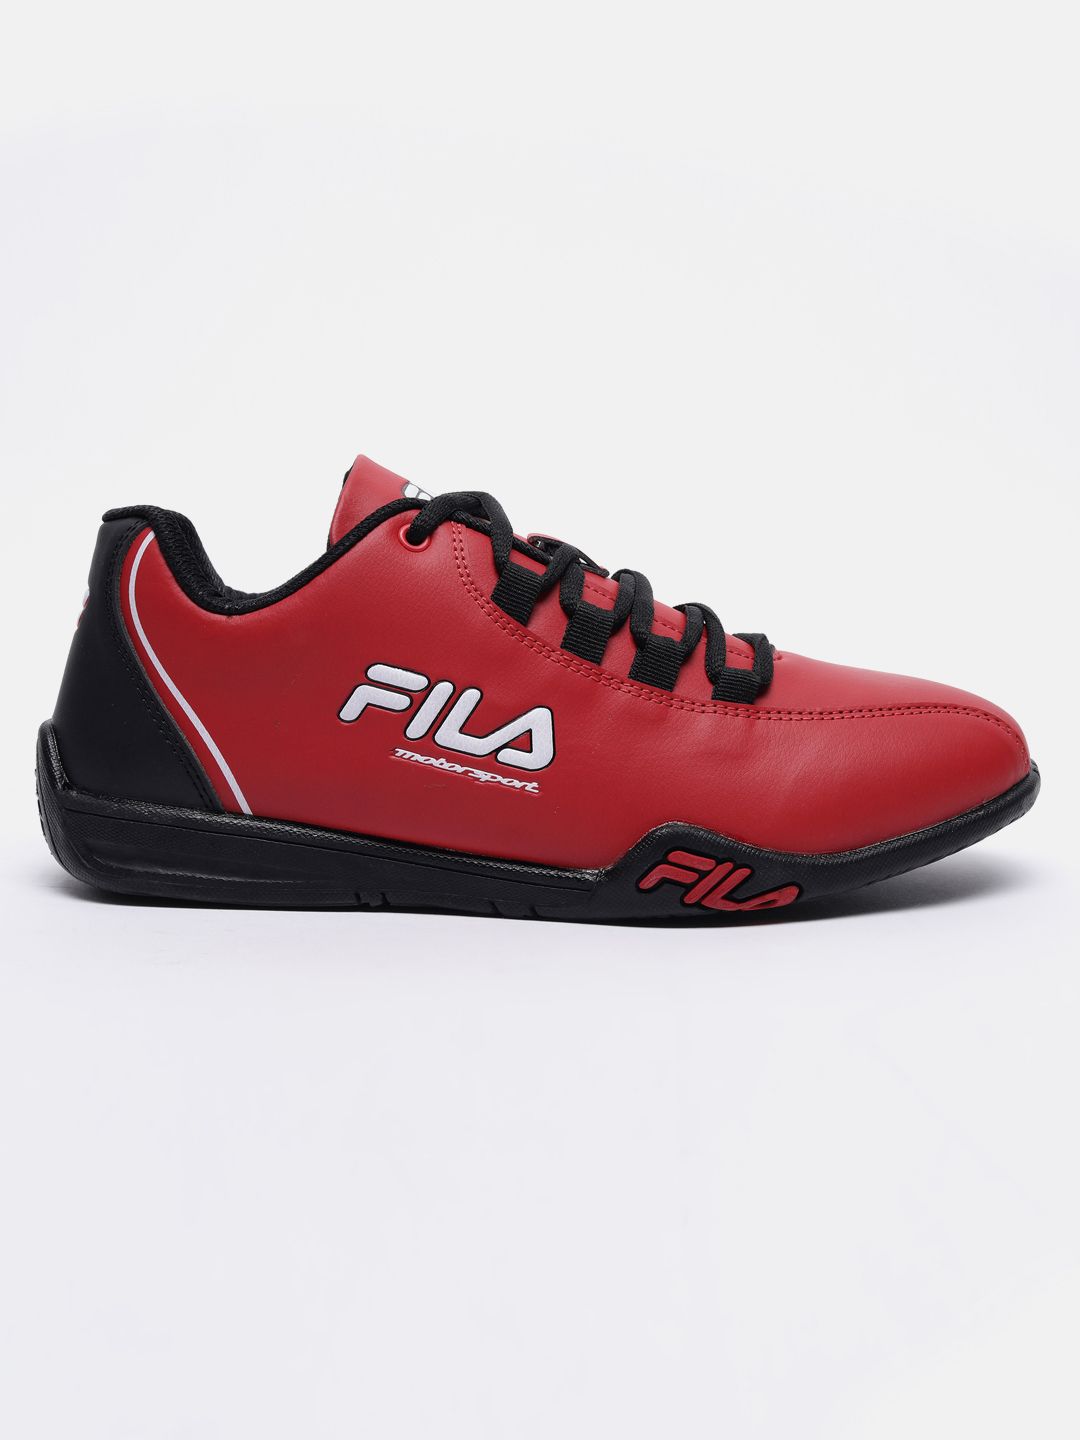 FILA Ray Tracer Orange Sneaker | Urban Outfitters Singapore